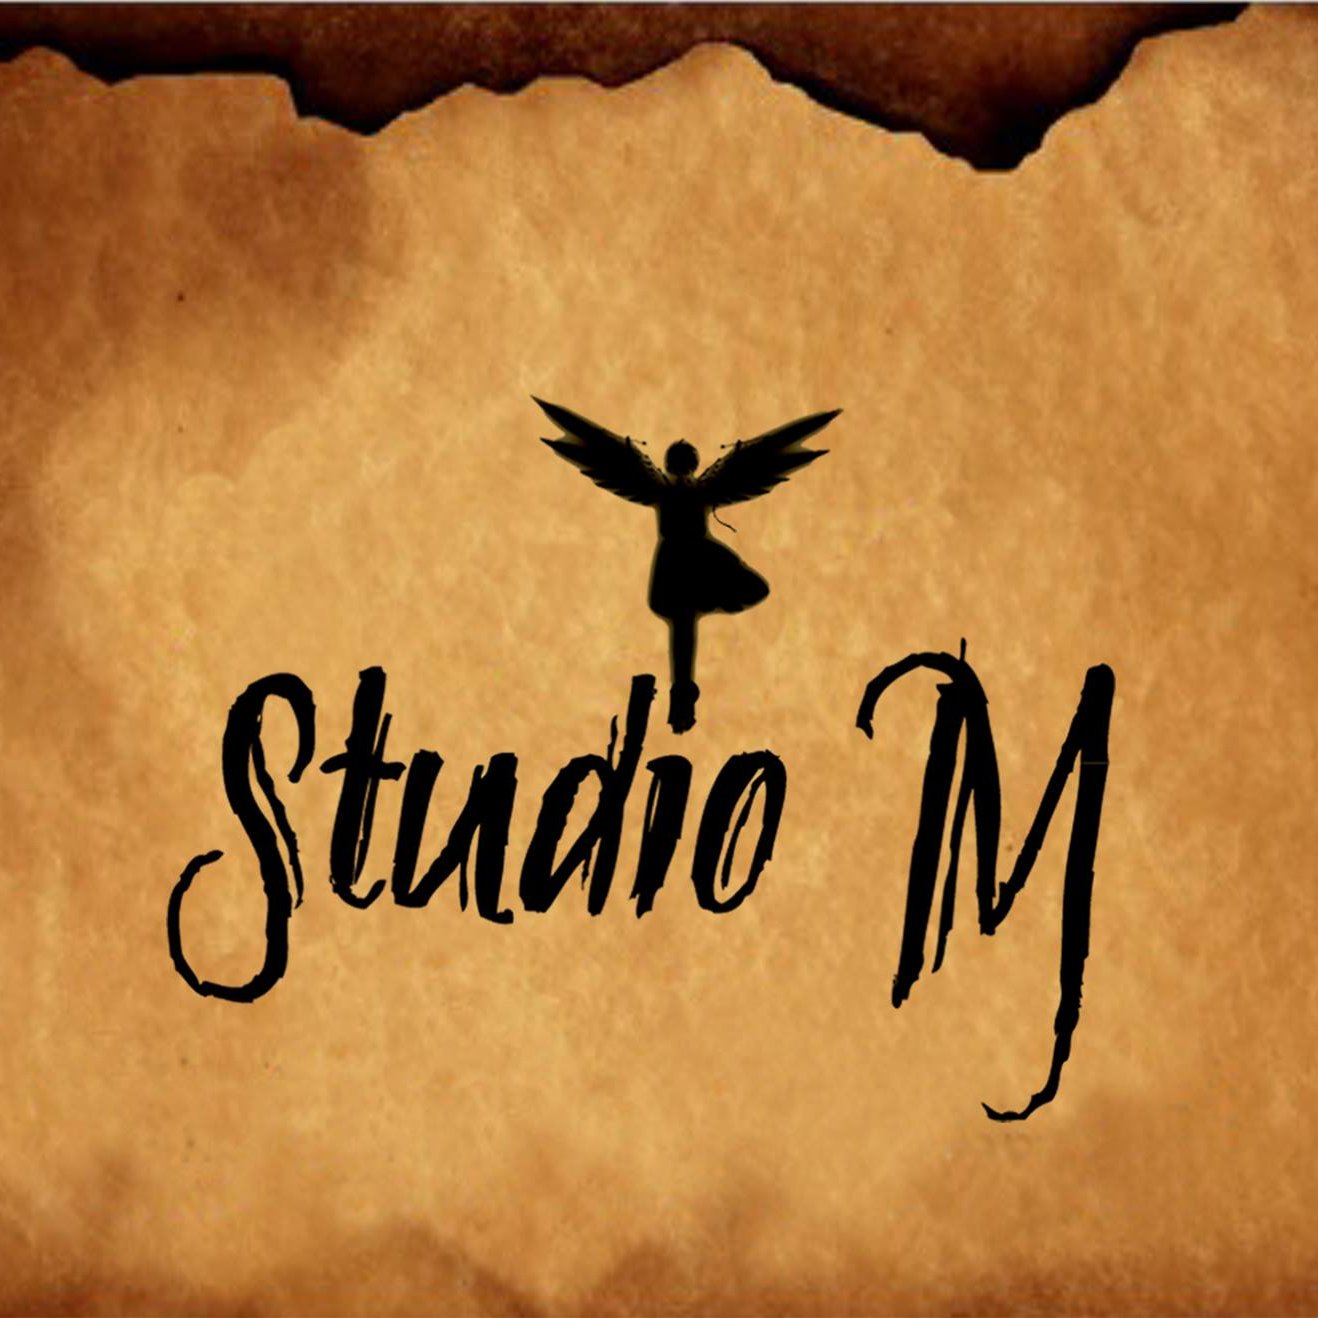 Studio M. Event Organizers dealing in all kind of events, Wedding, Birthdays, Impromptu, Business Parties and lot's more.